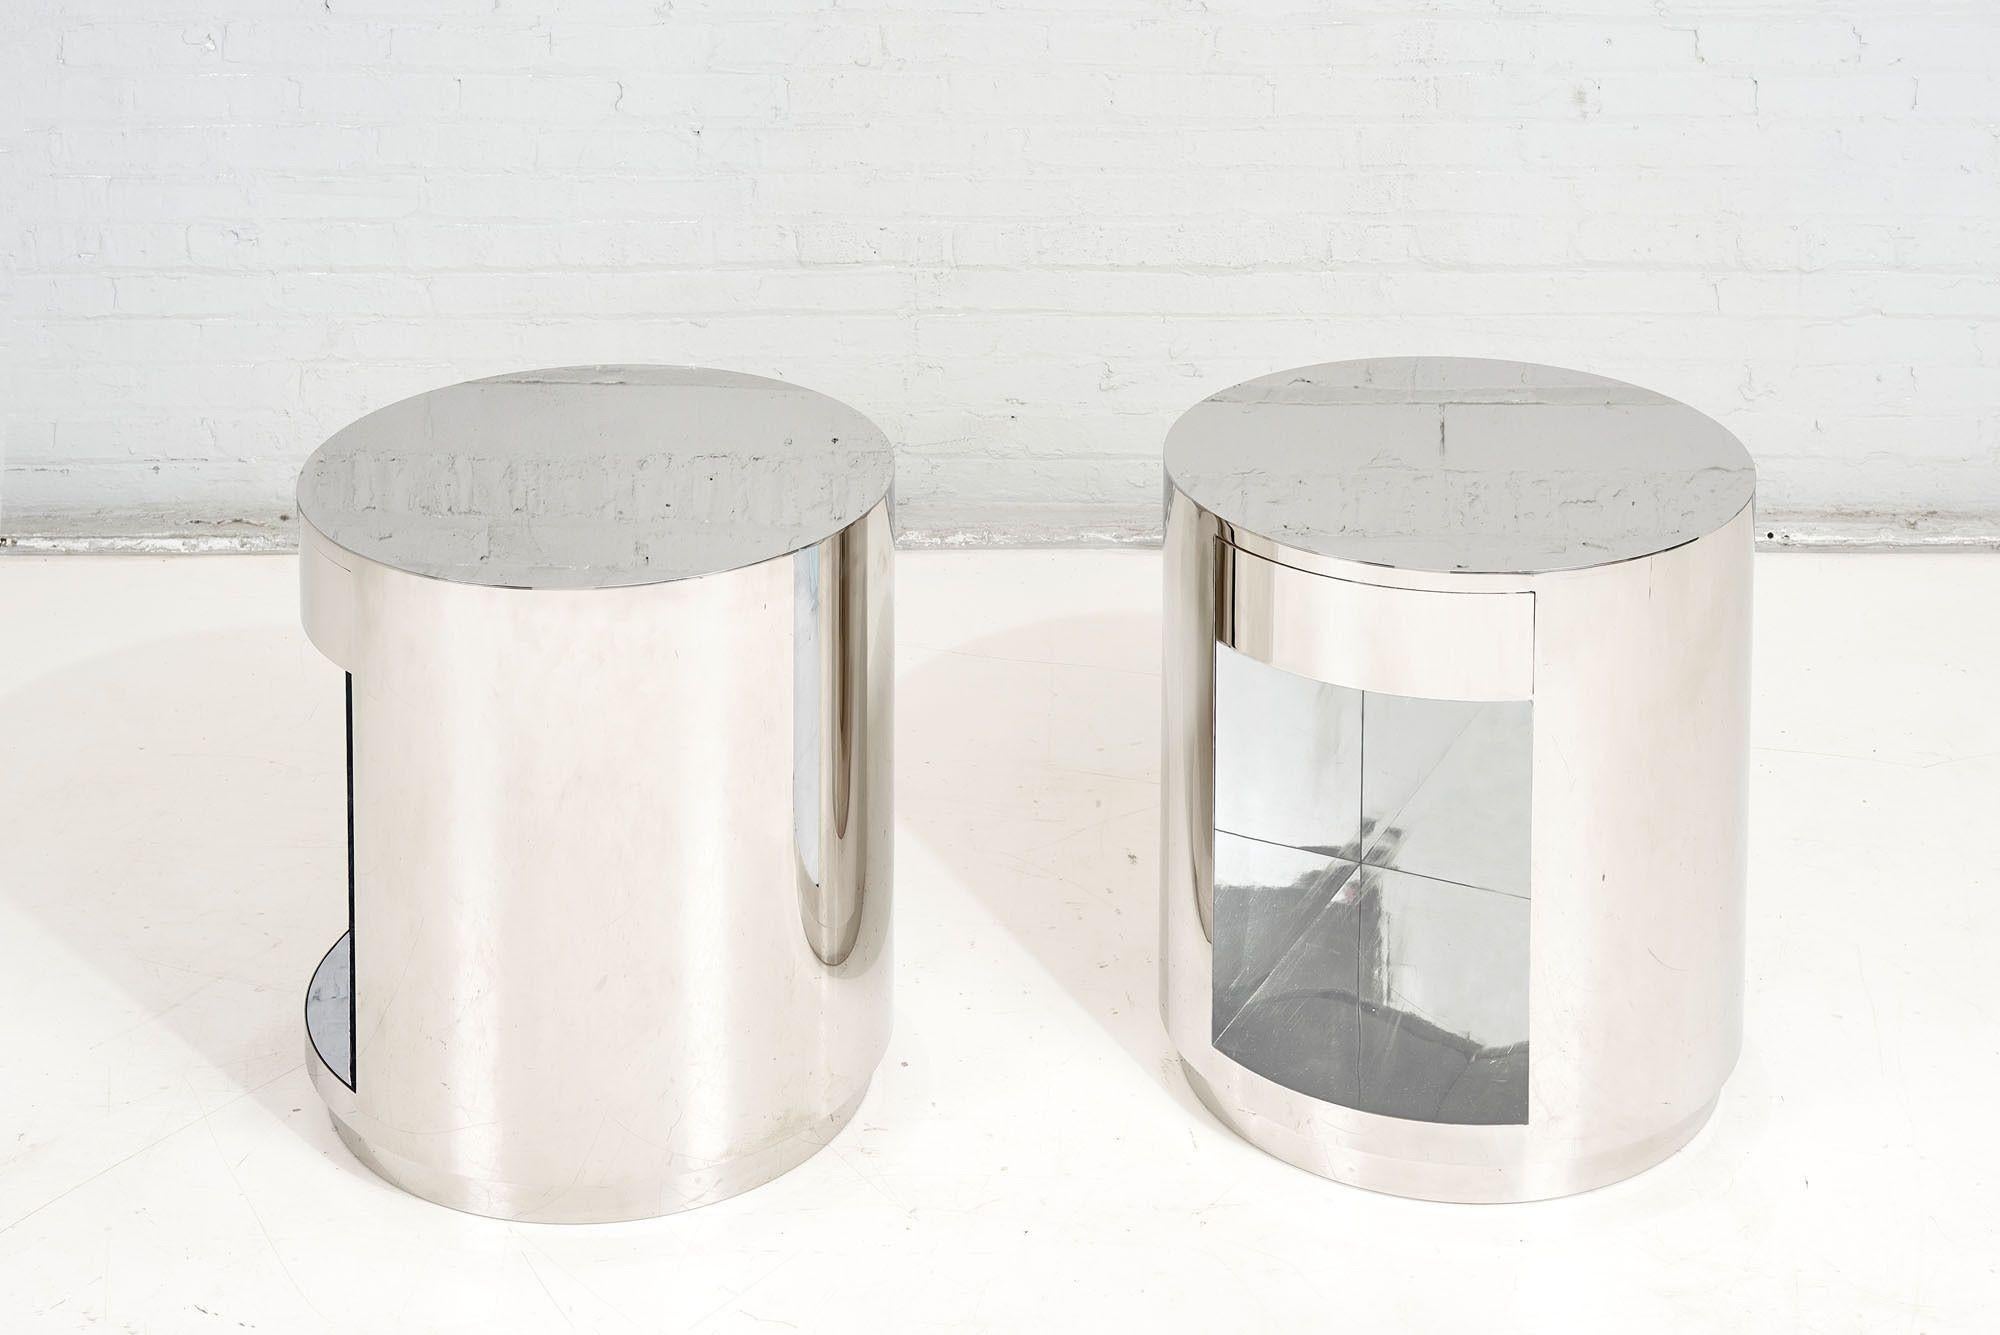 American Pace Collection Stainless Steel Drum Tables with Drawer, 1970